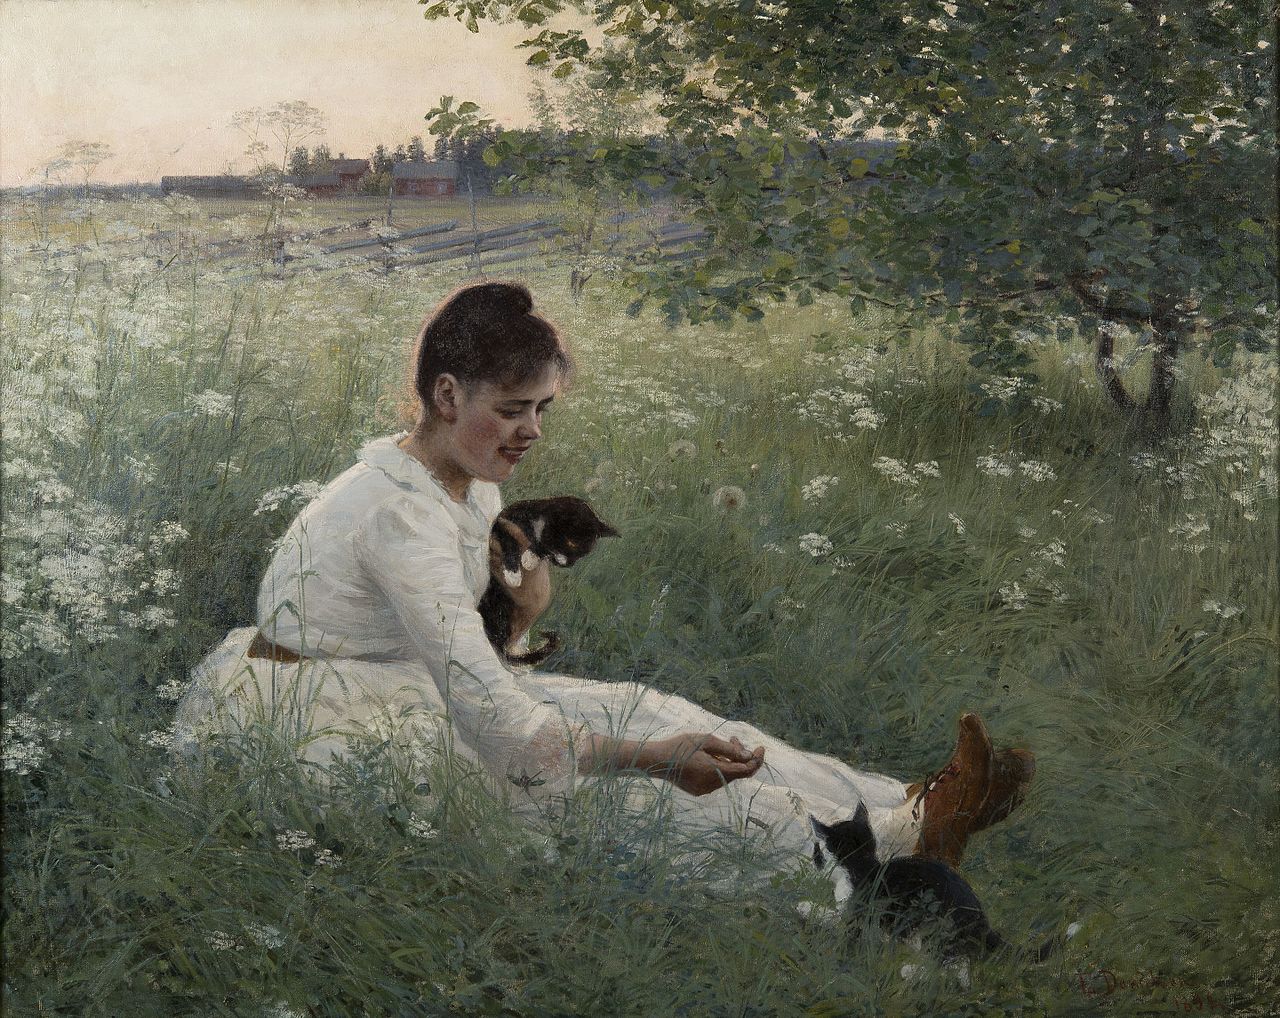 Inspiration: “Girl With Cats in a Summer Landscape,” by Elin Danielson-Gambogi